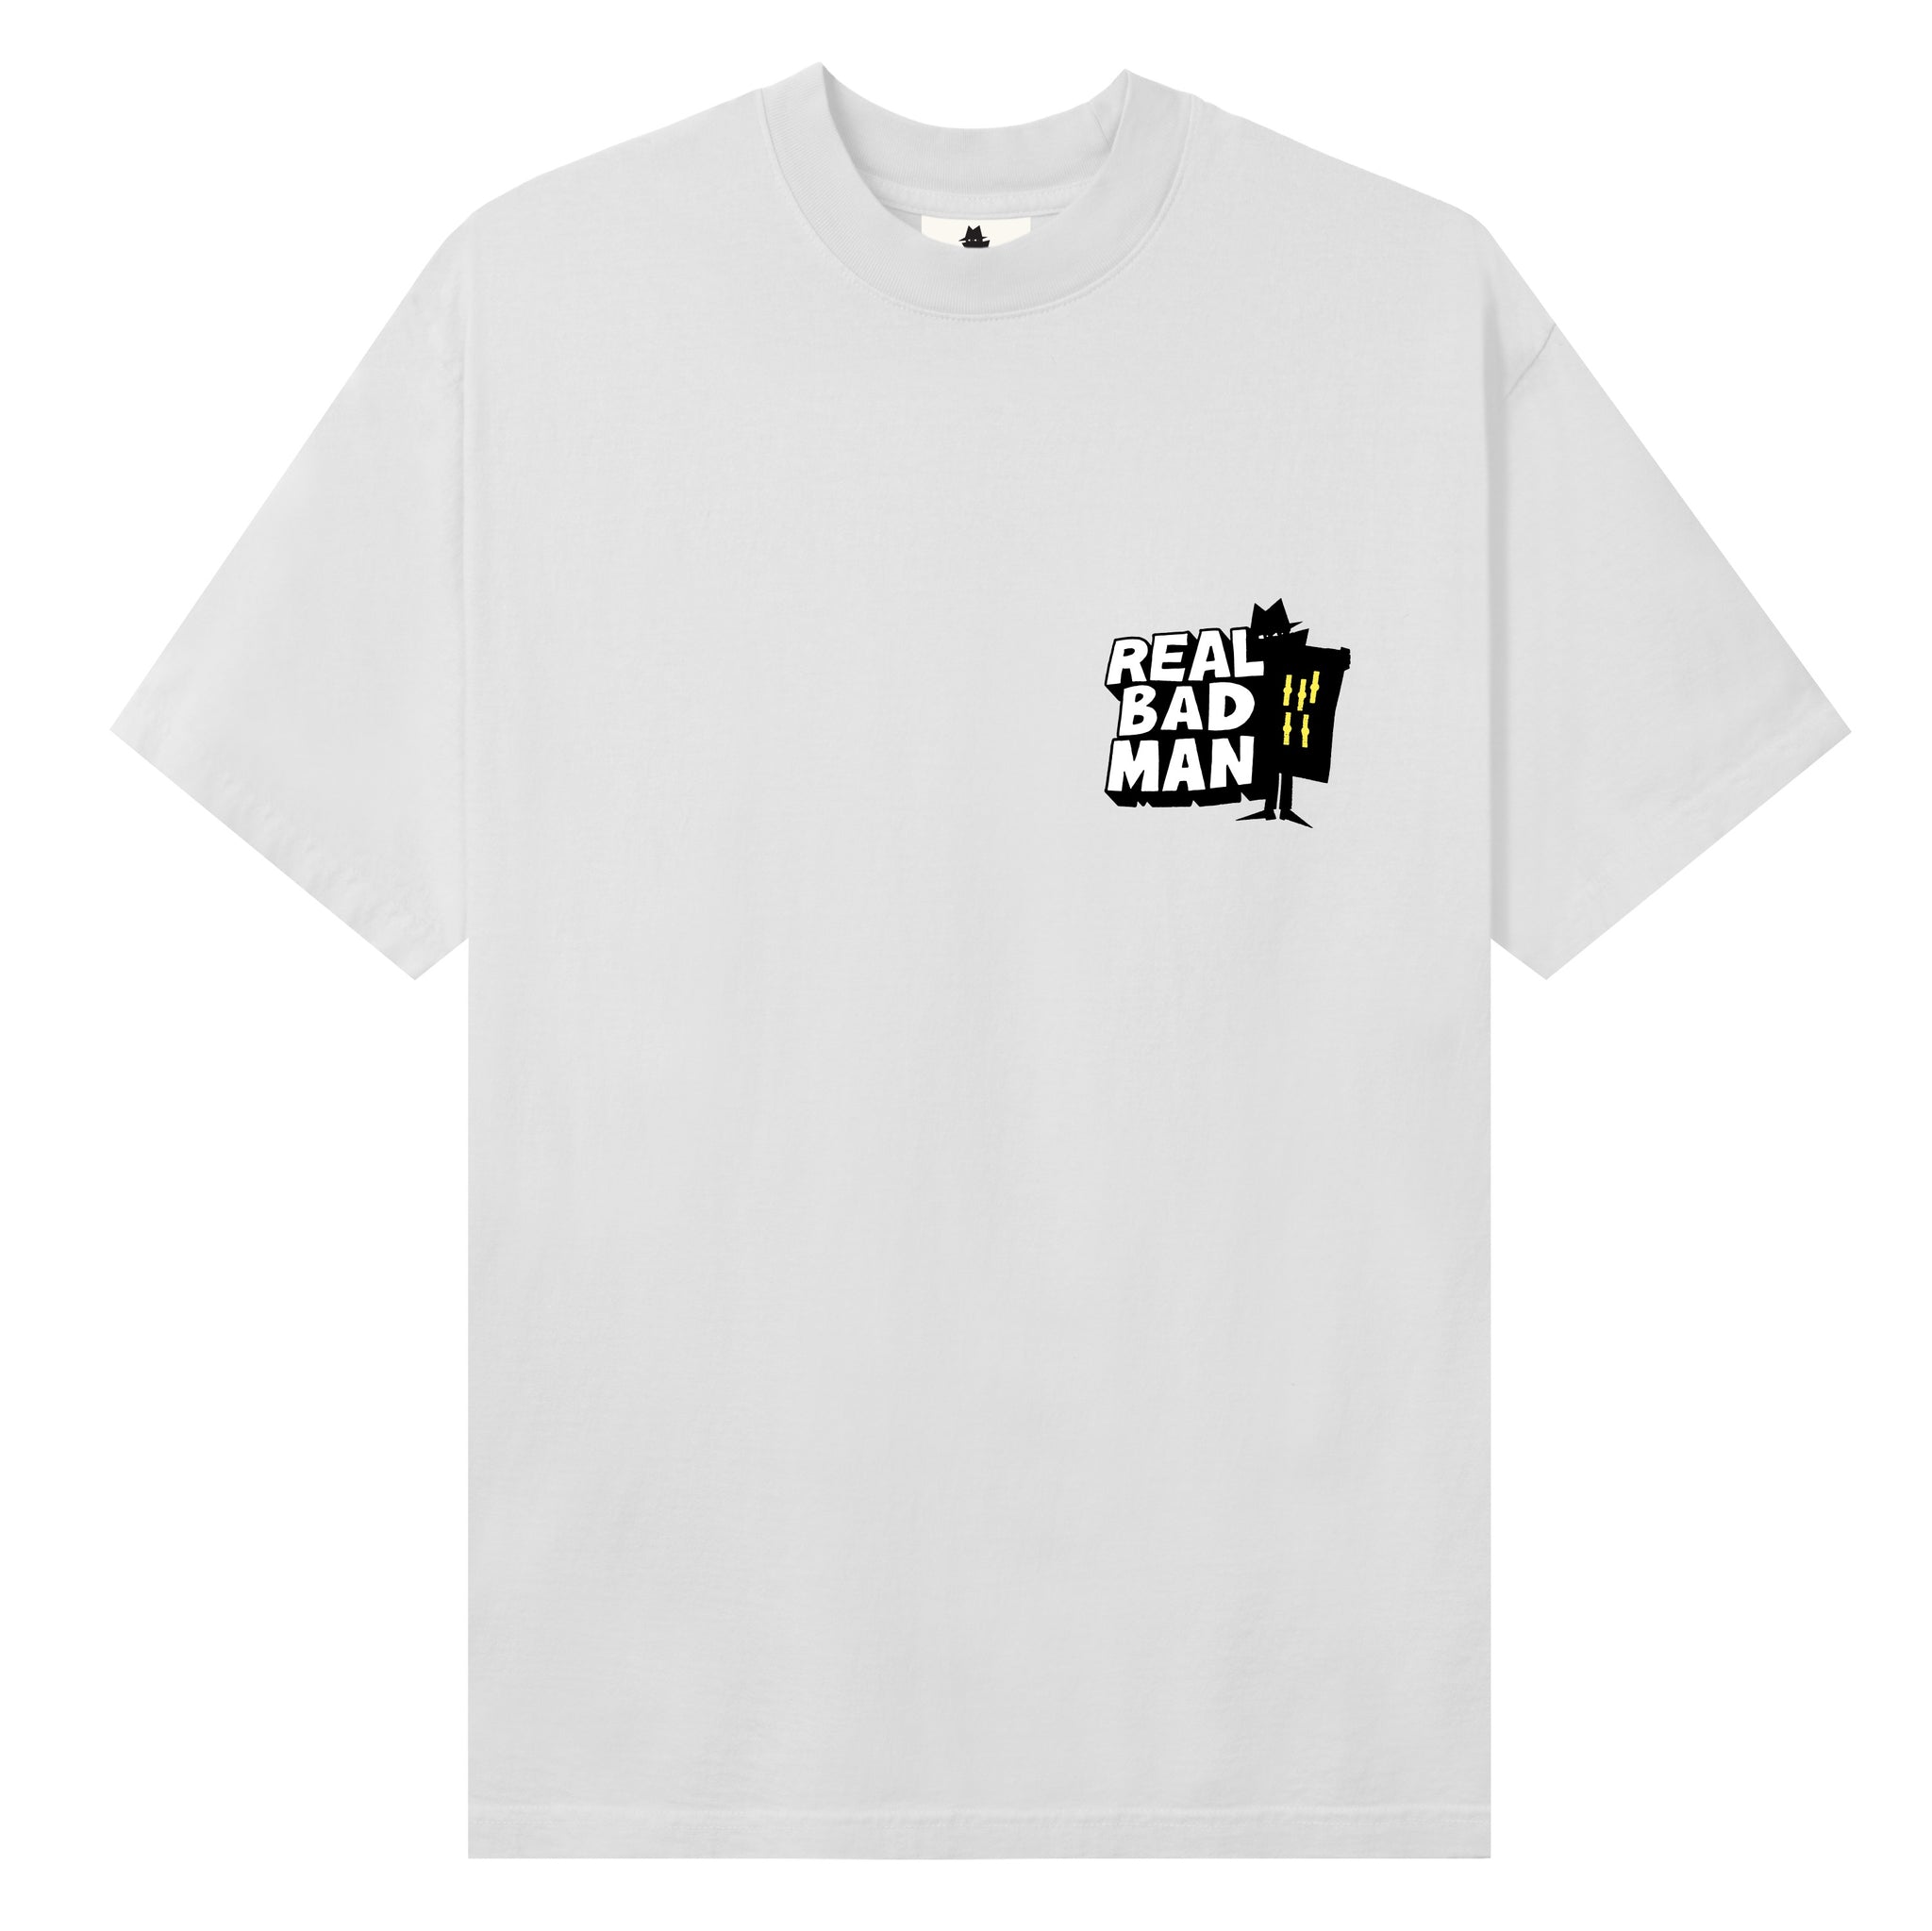 Who Goes There Tee - White